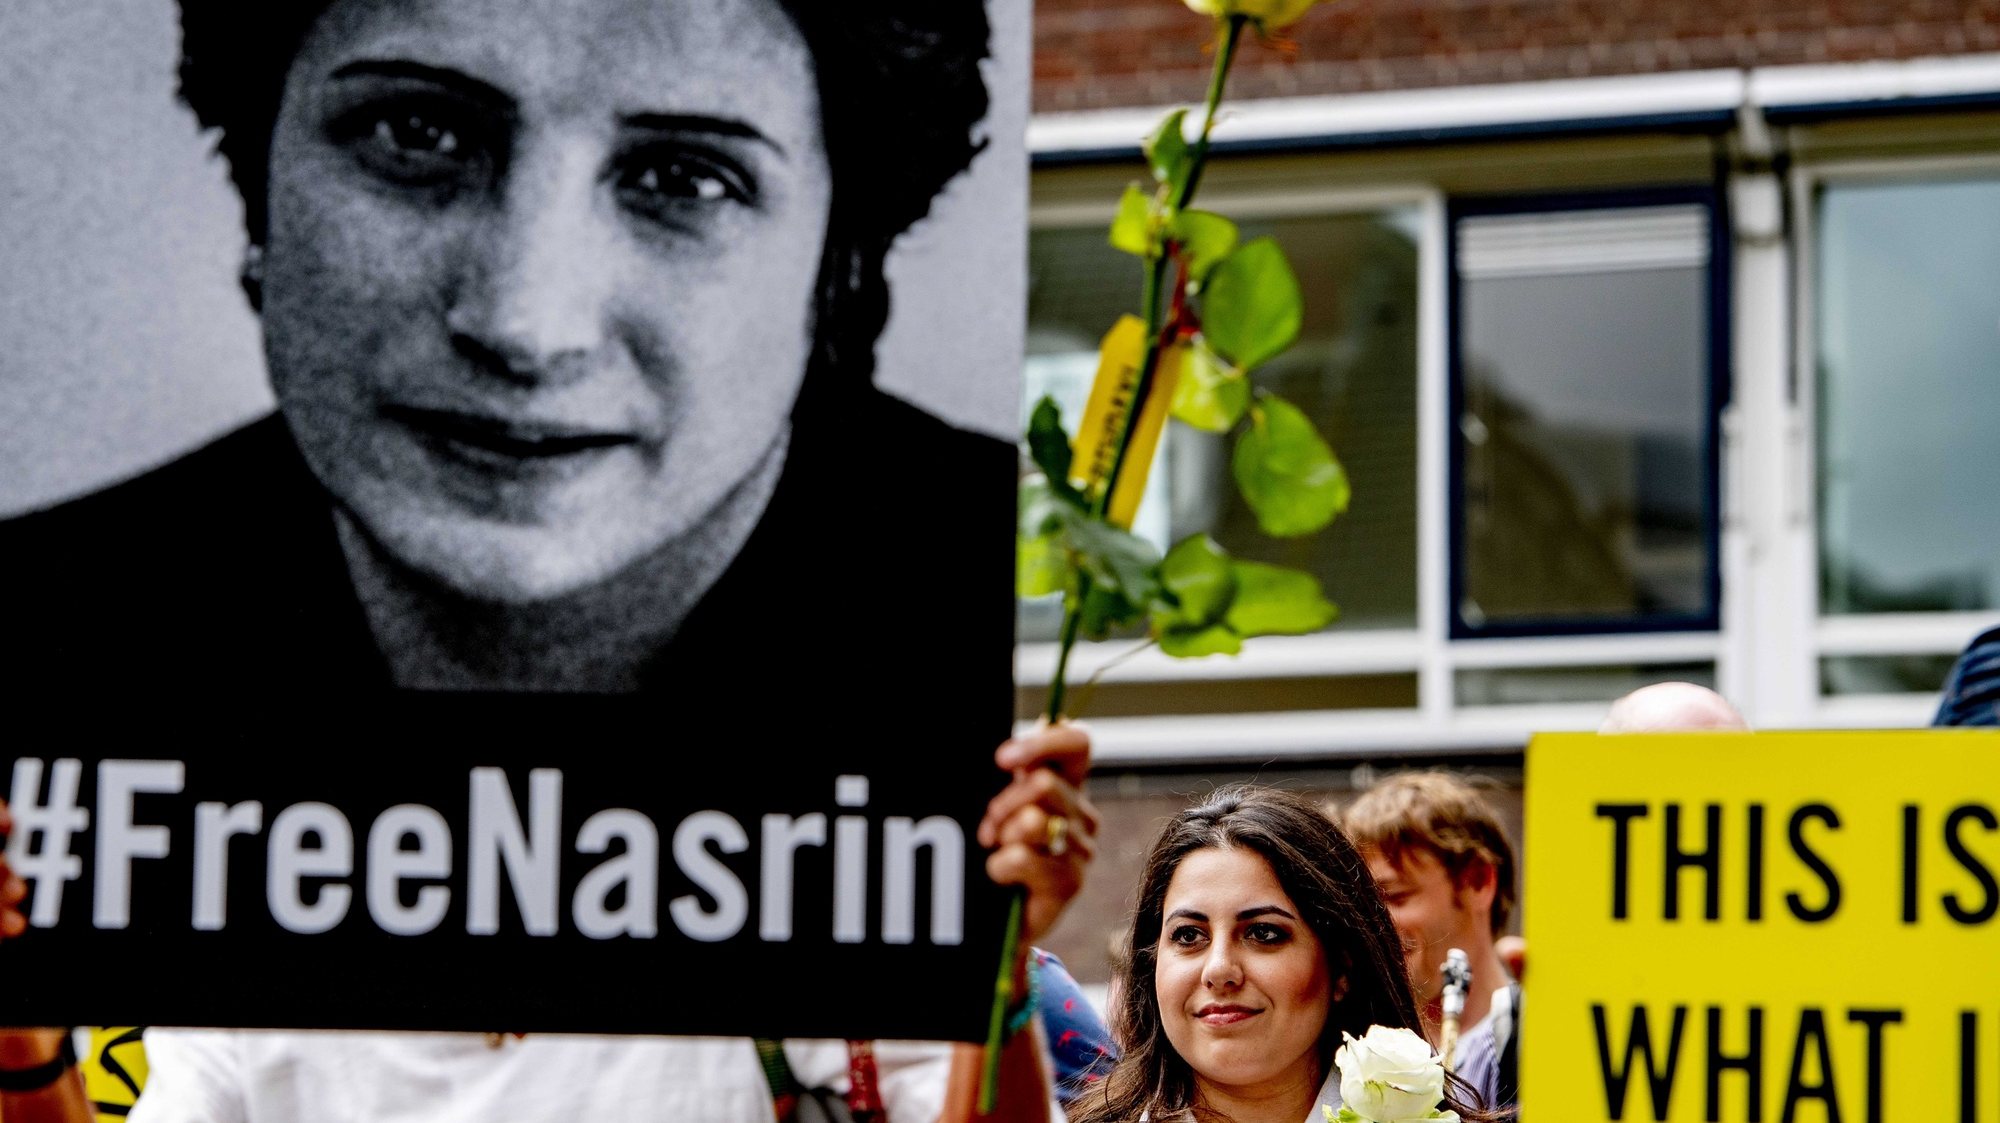 epa07615050 Supporters of Amnesty International take part in a campaign for the release of Iranian human rights lawyer Nasrin Sotoudeh by celebrating a birthday party in front of the Iranian embassy in The Hague, The Netherlands, 31 May 2019. According to reports, human rights lawyer Sotoudeh was sentenced in Iran to 38 years in prison and 148 lashes.  EPA/ROBIN UTRECHT